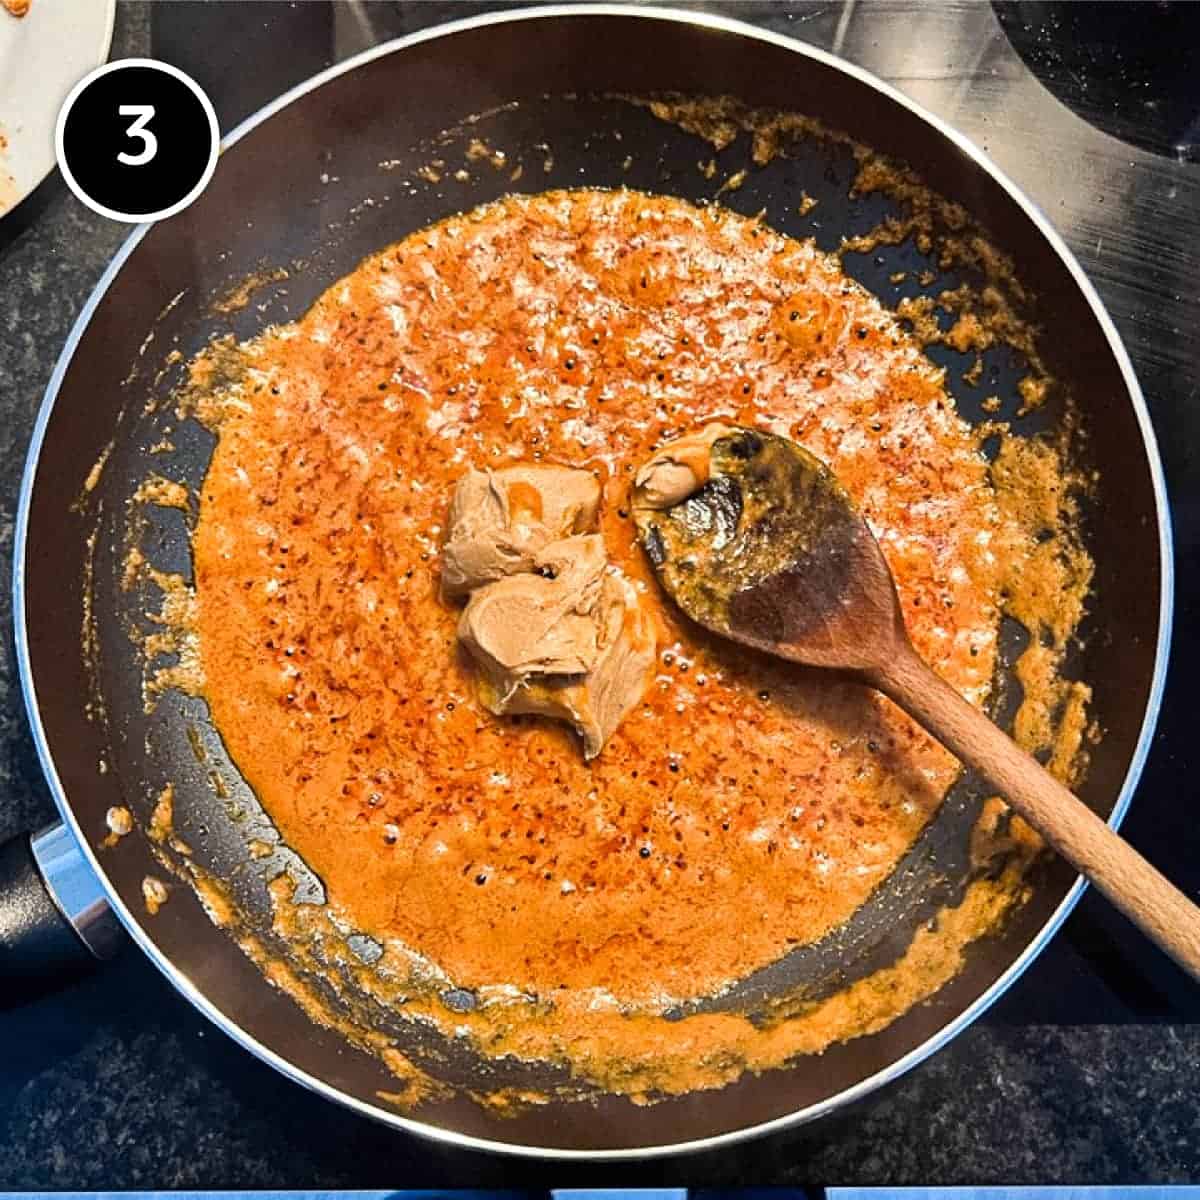 Adding peanut butter to the sauce for a satay chicken curry